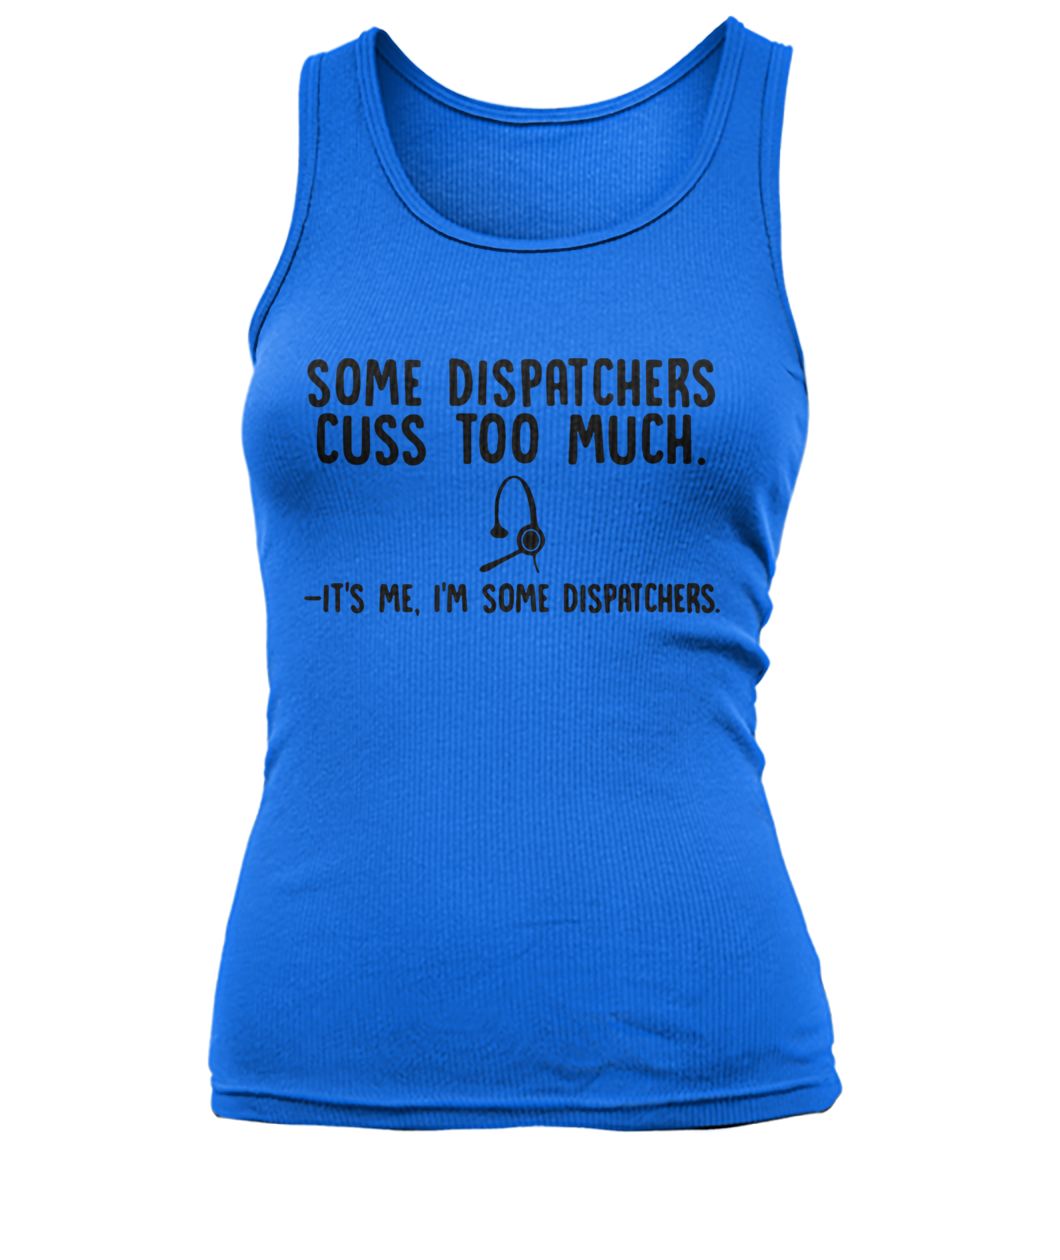 Some dispatchers cuss too much it's me I'm some dispatchers women's tank top